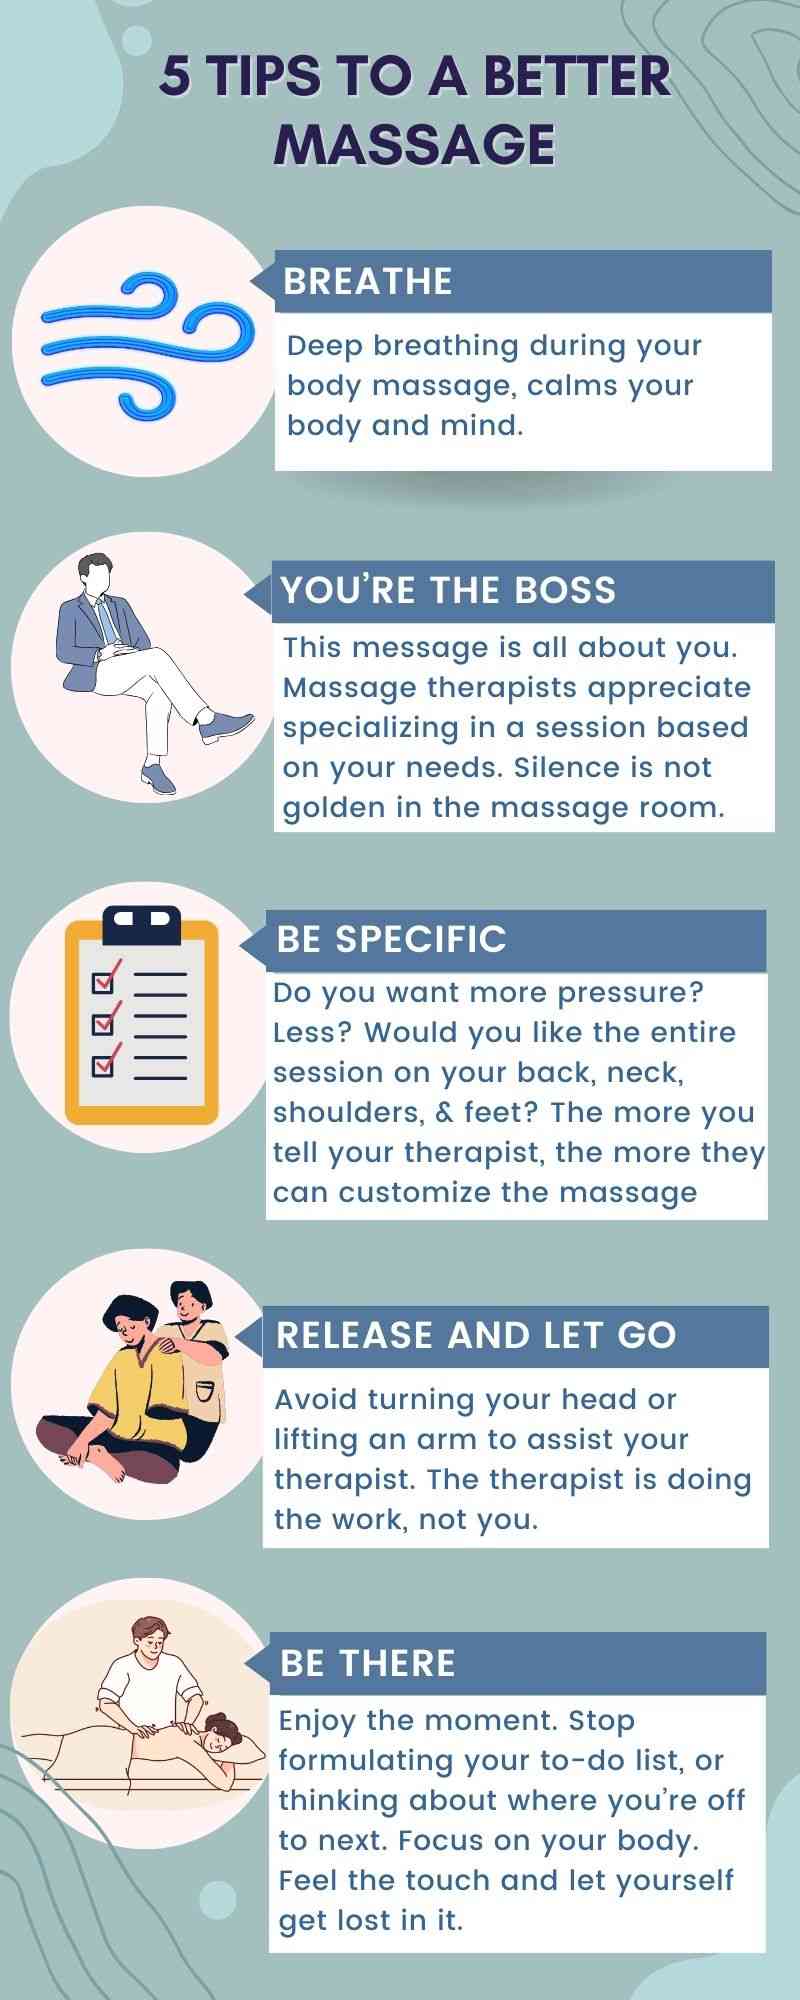 5 Tips to a Better Massage